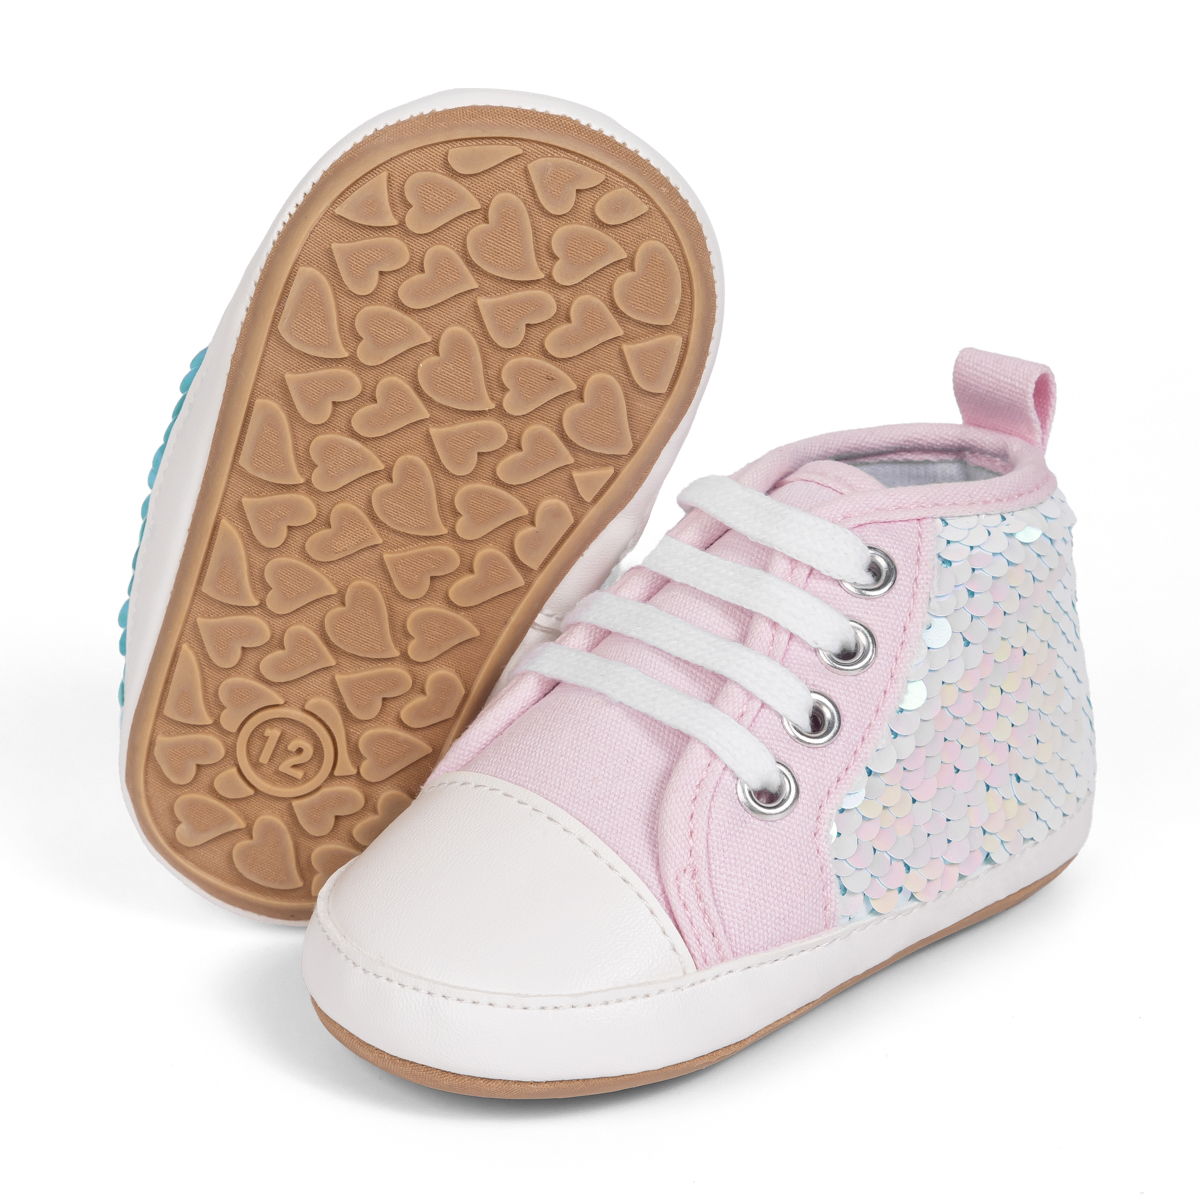 PU Upper Non Slip Baby Casual Shoes